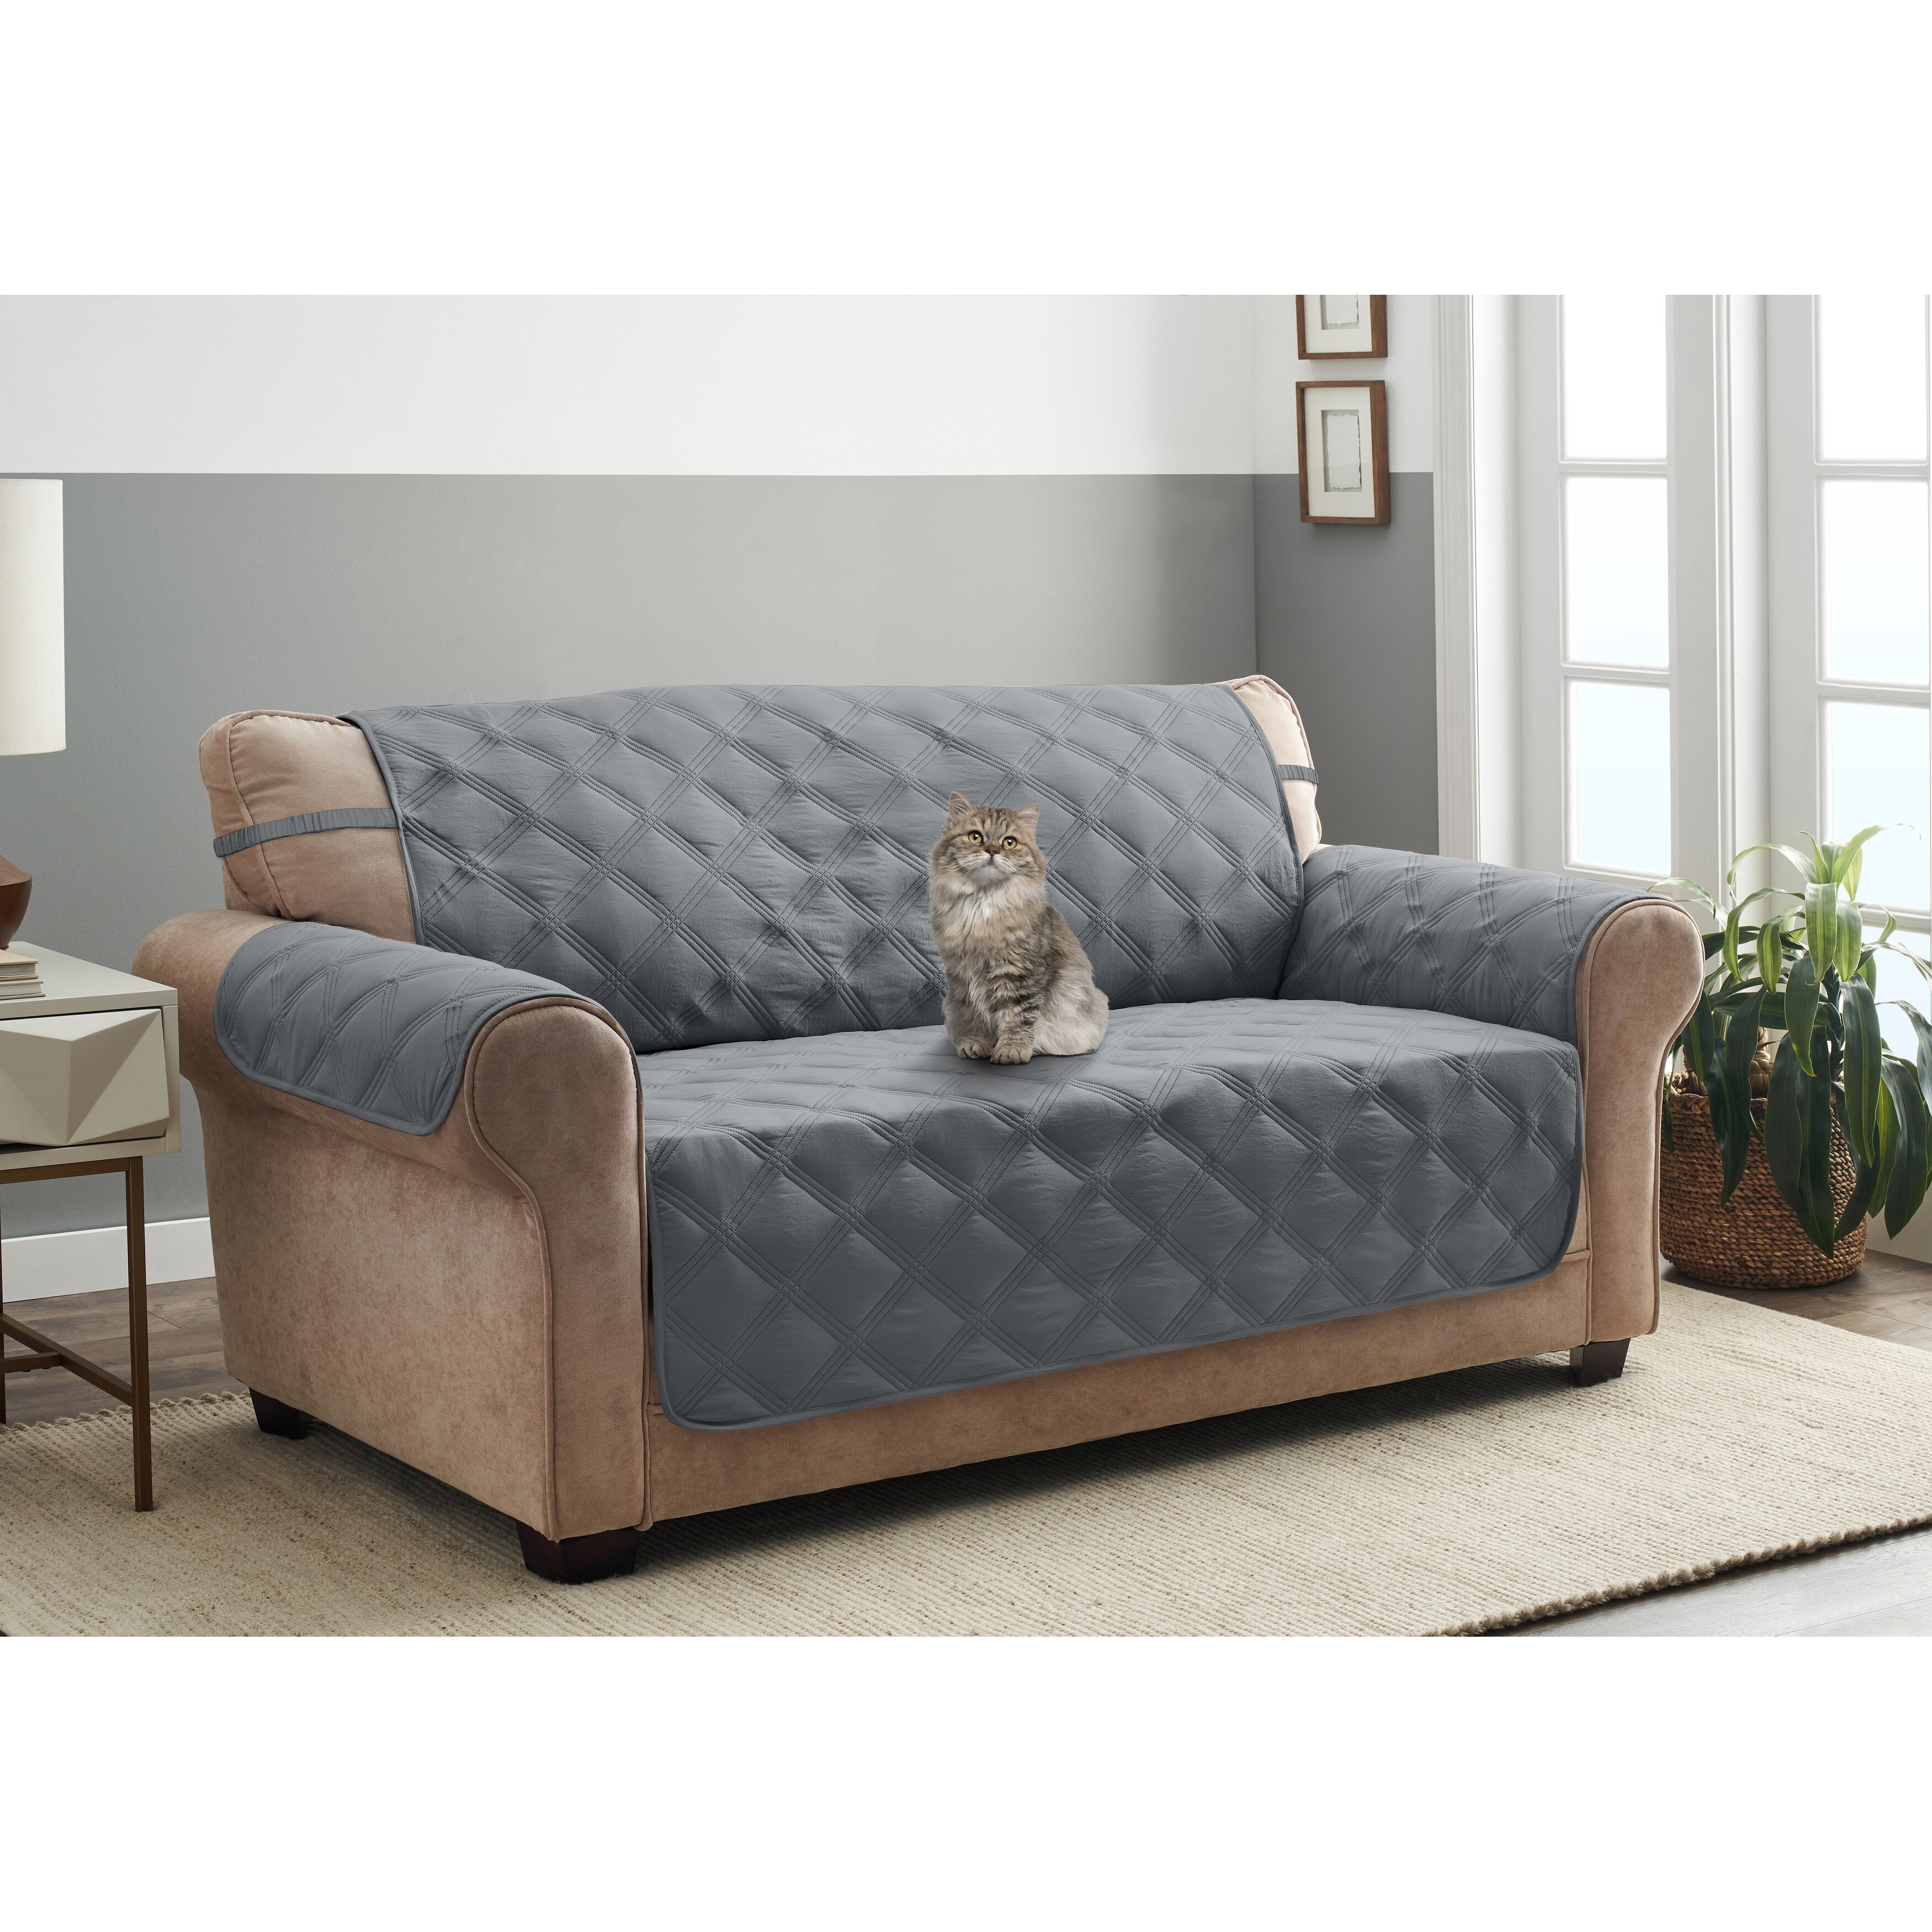 NEWFIELD SECTIONAL SOFA (LEFT)